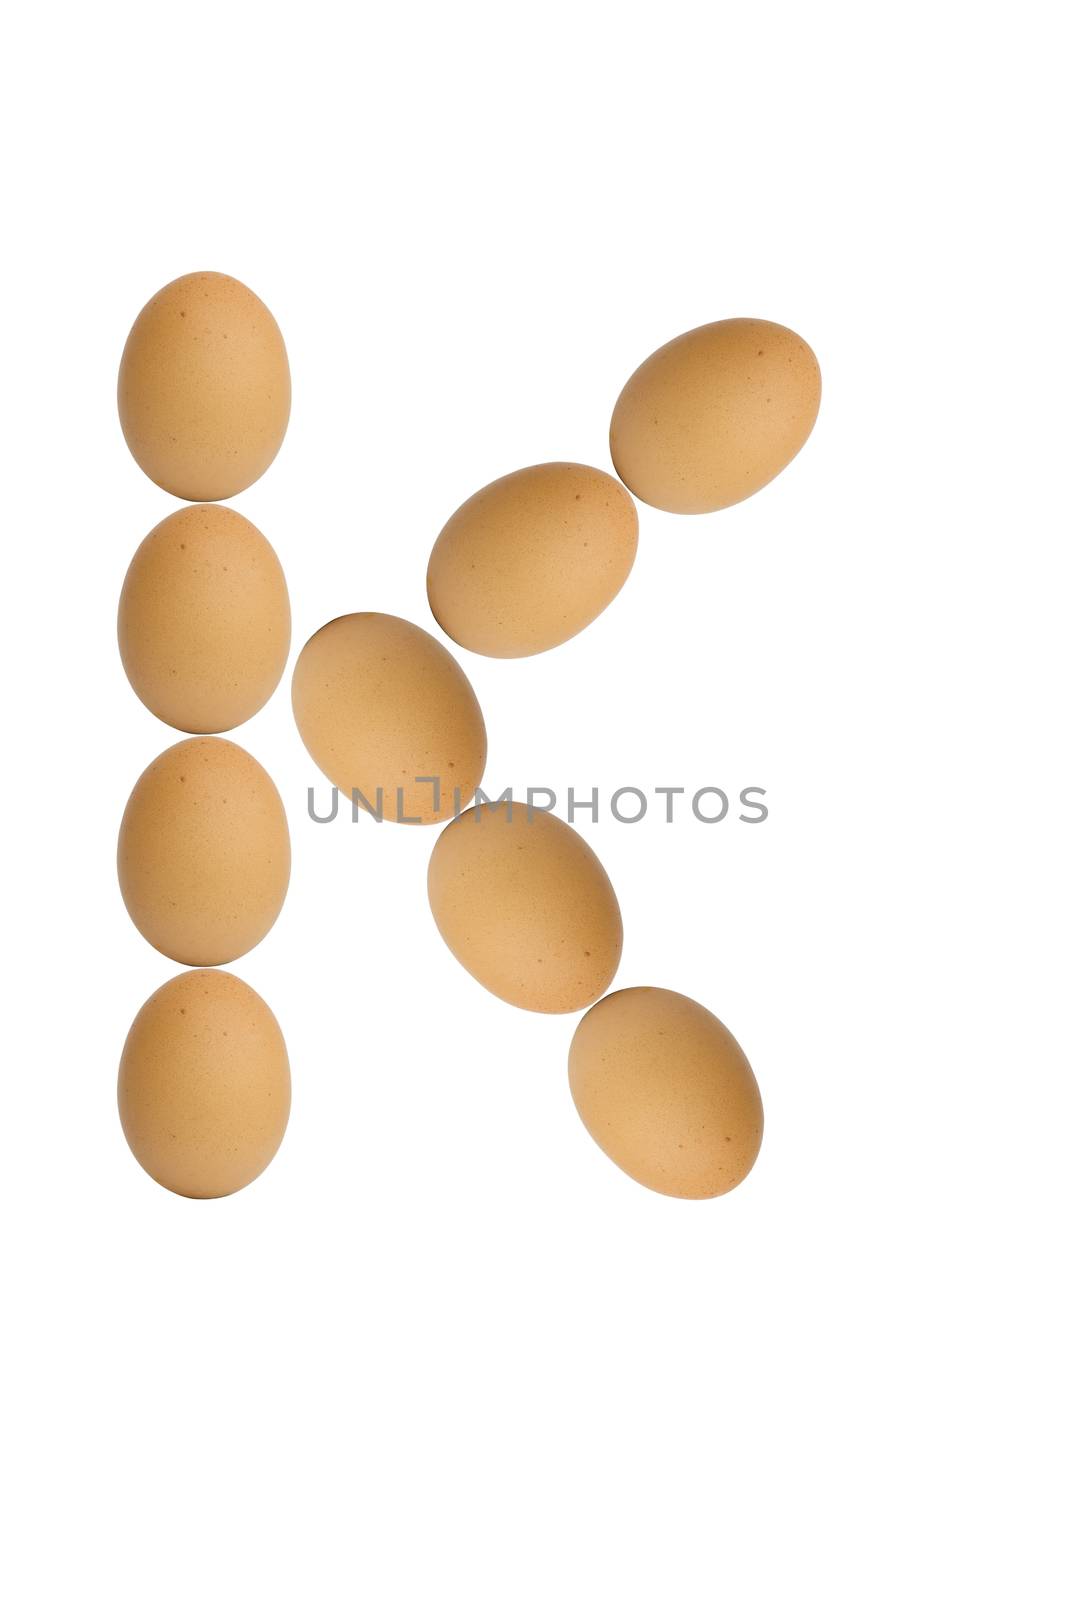 Alphabets  A to Z from brown eggs alphabet isolated on white background, K